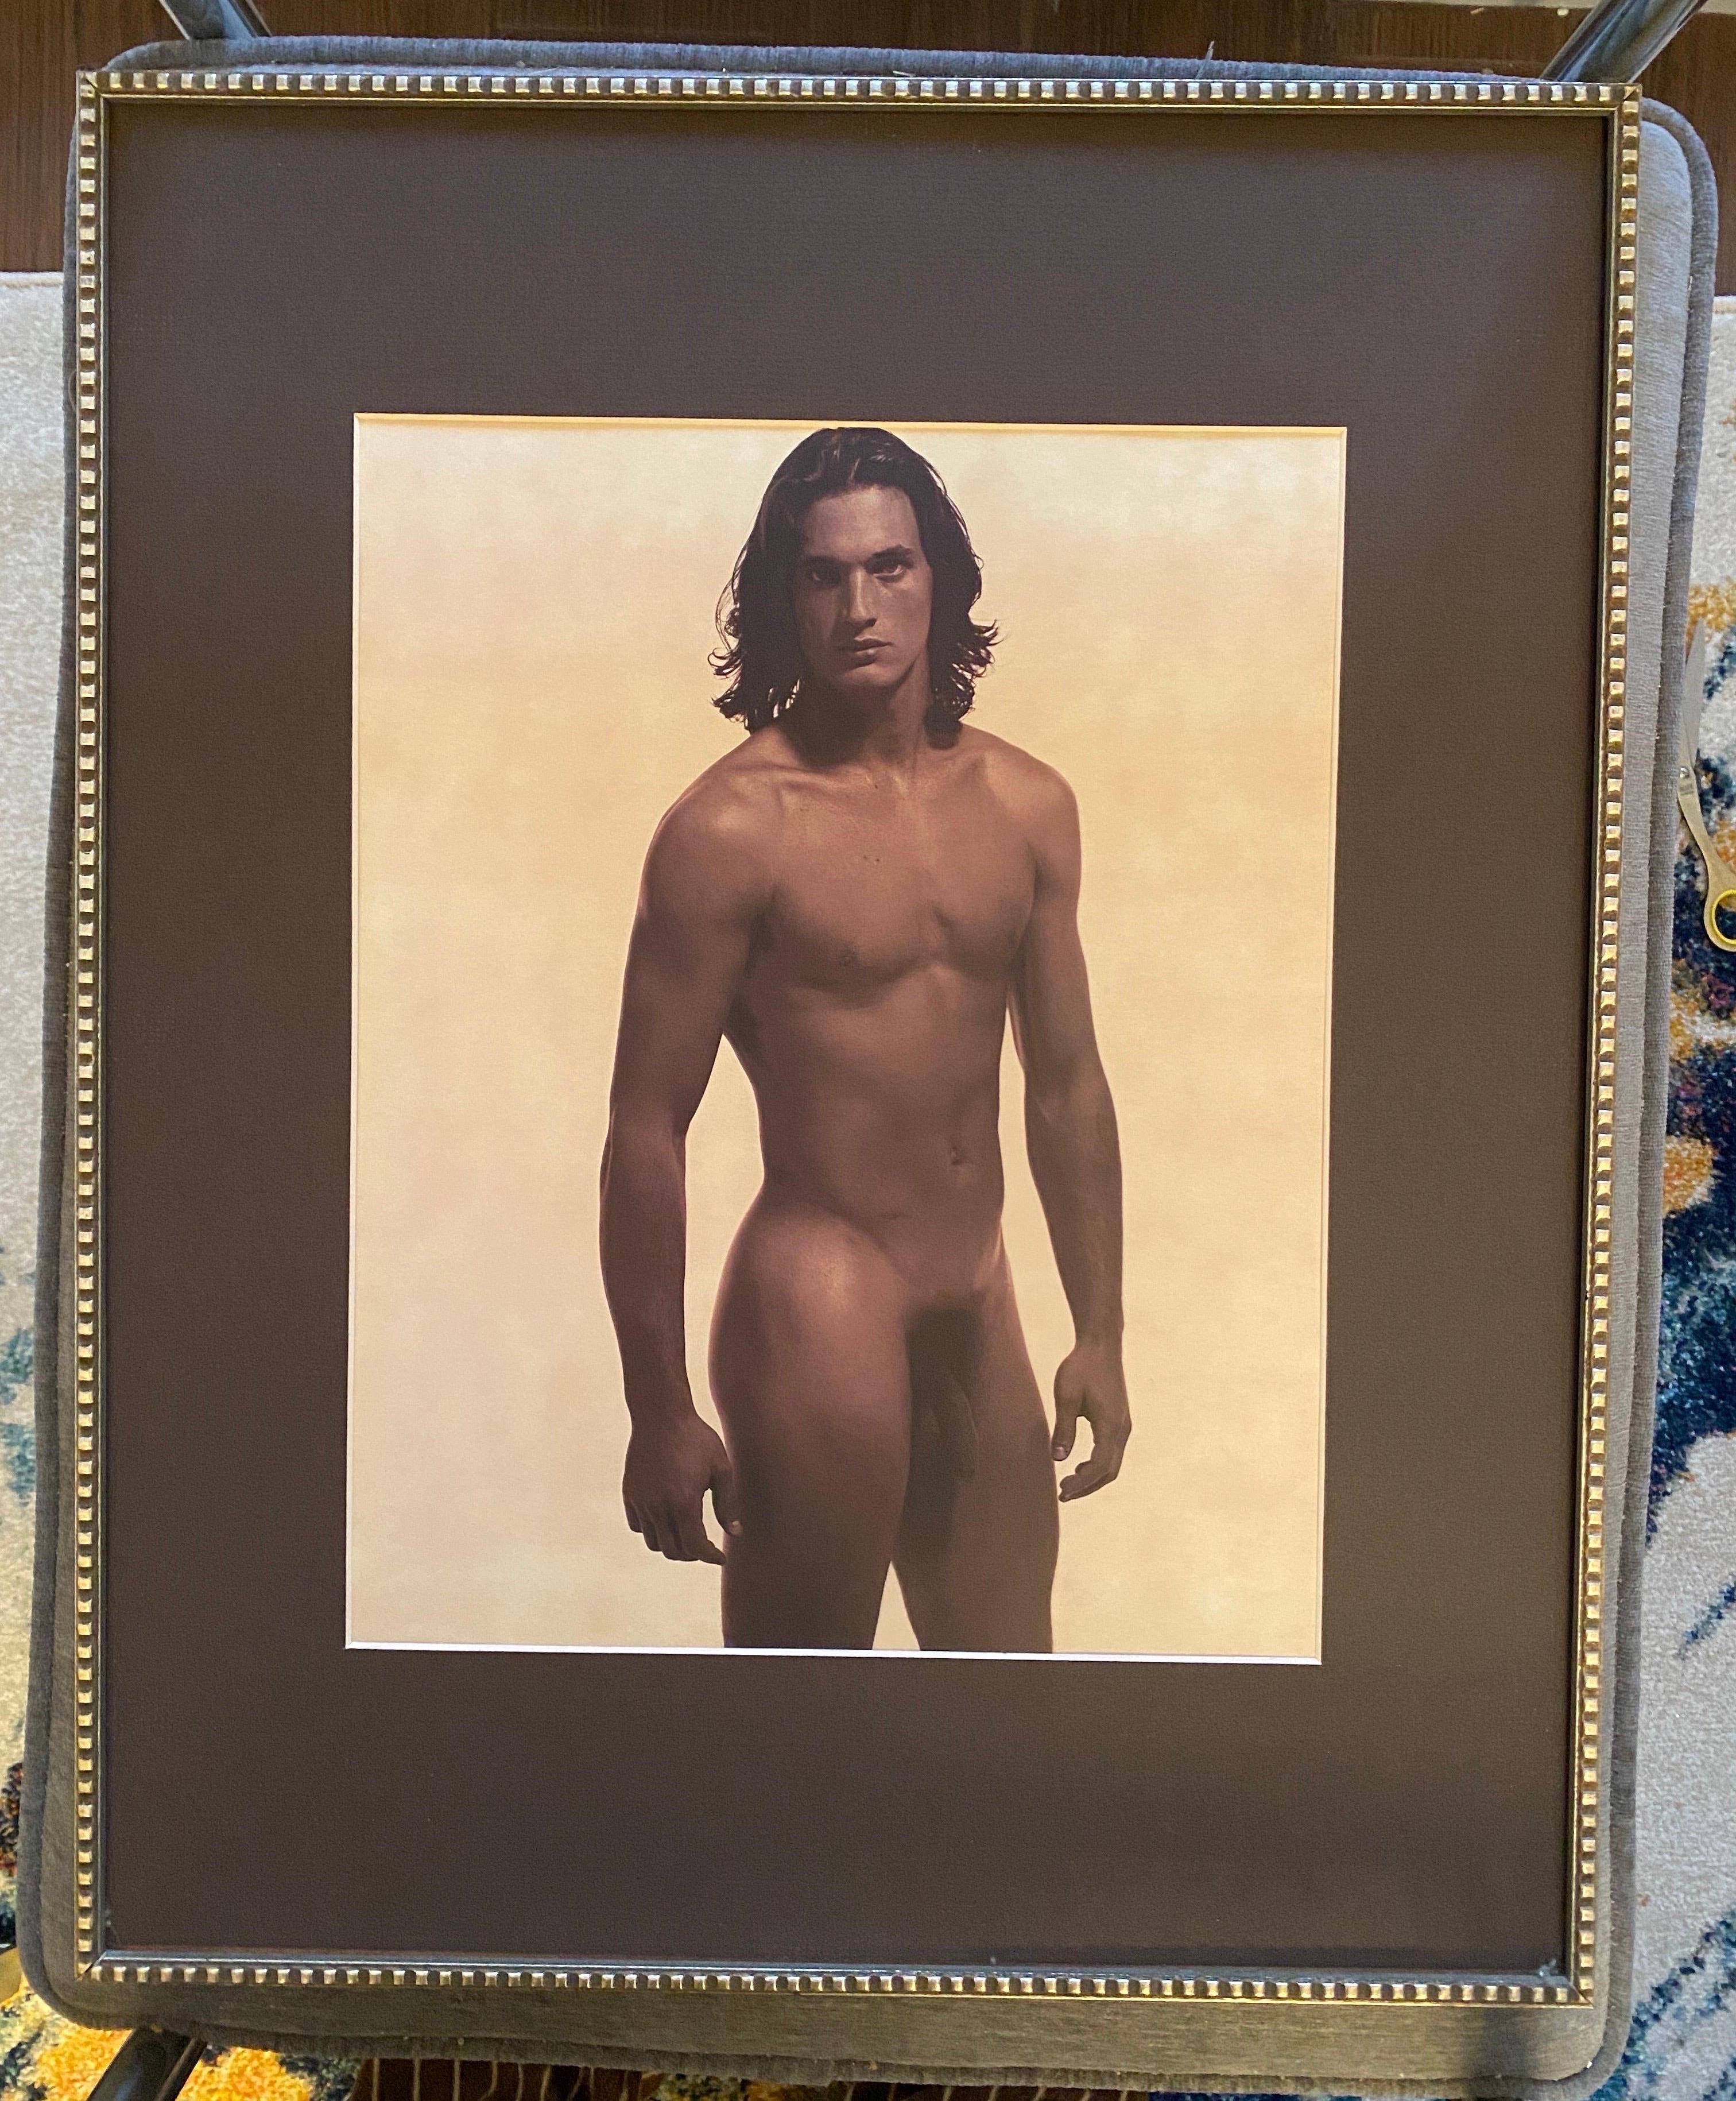 Karl Lagerfeld photograph of Philippe Reynaud, 1997.
This beautiful male nude was included in a boxed series of photograph lithographs of nude models/celebrities done for Visionaire, NYC published in 1997. These rare photo lithos (#3818/5000) are